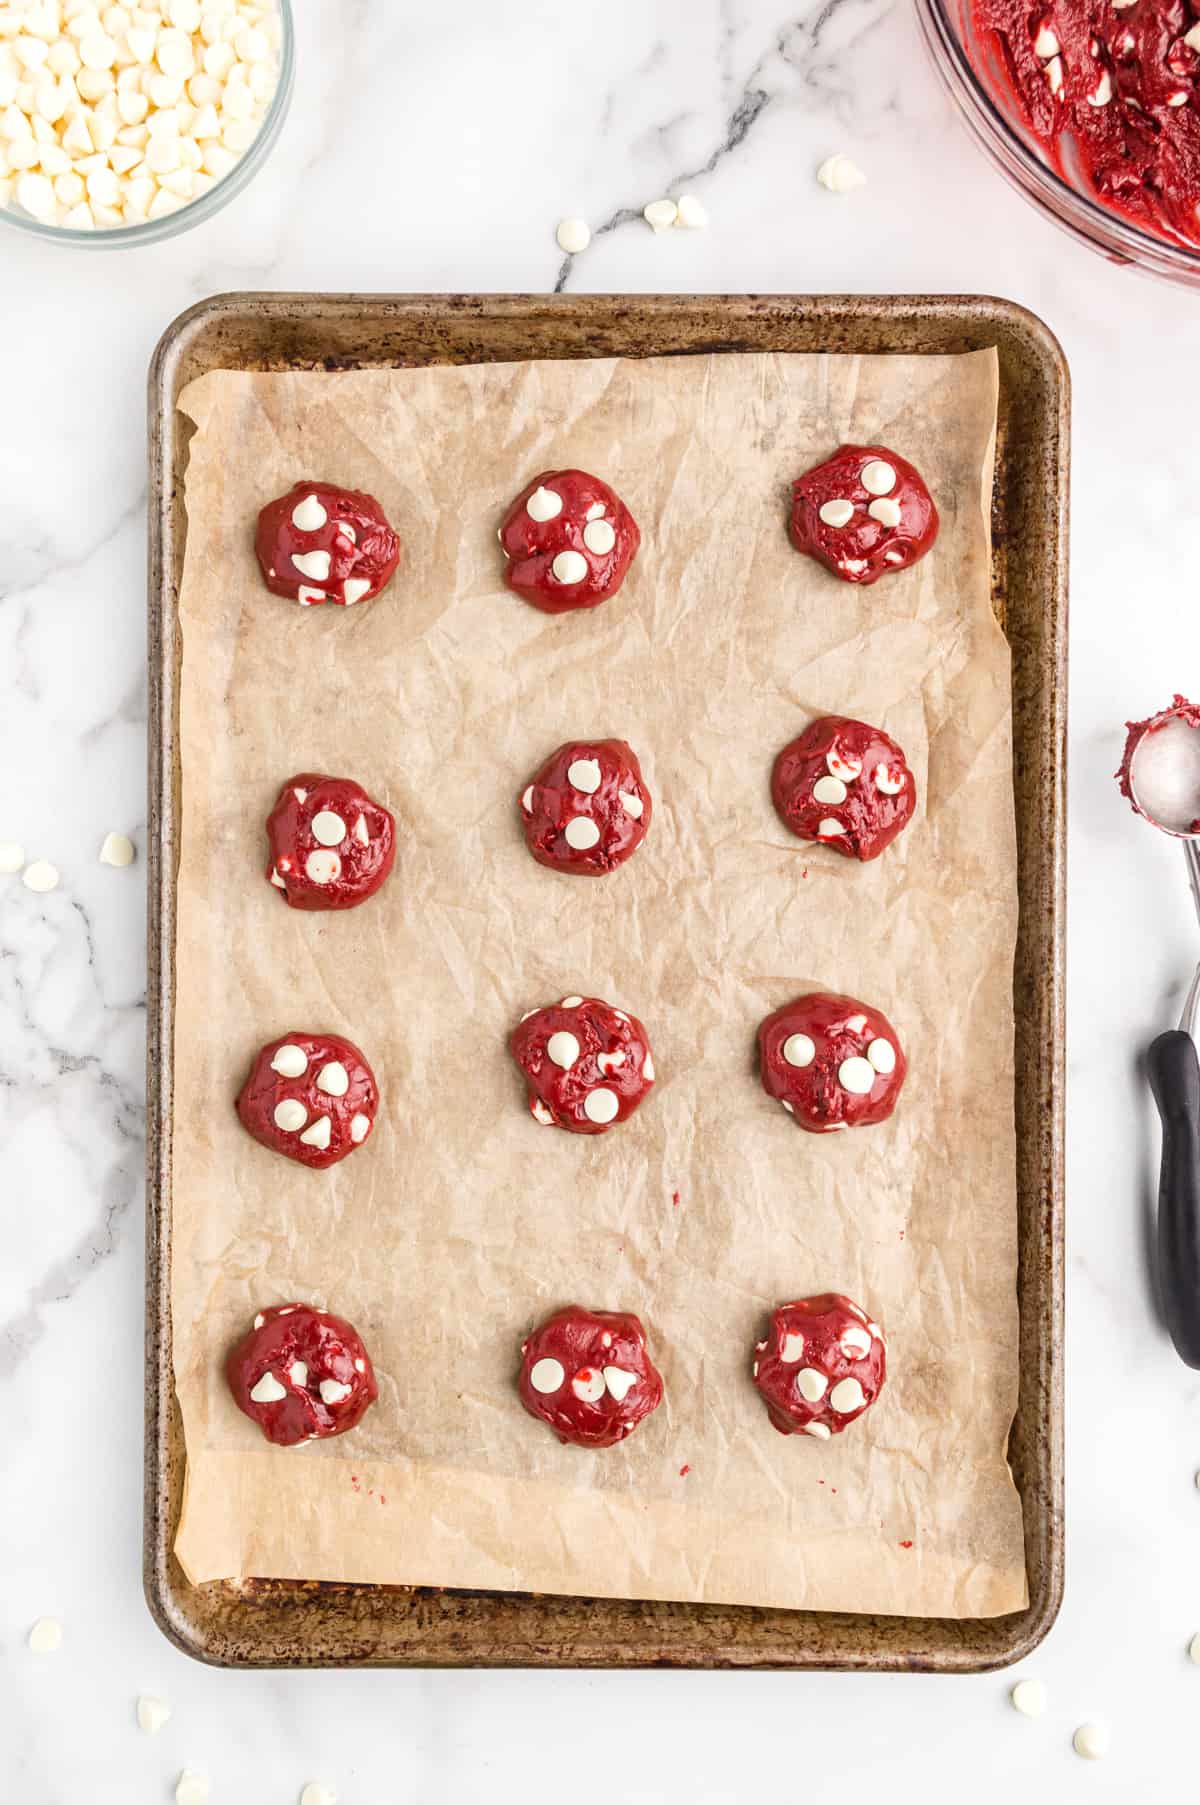 12 balls of cookie dough on parchment lined baking sheet